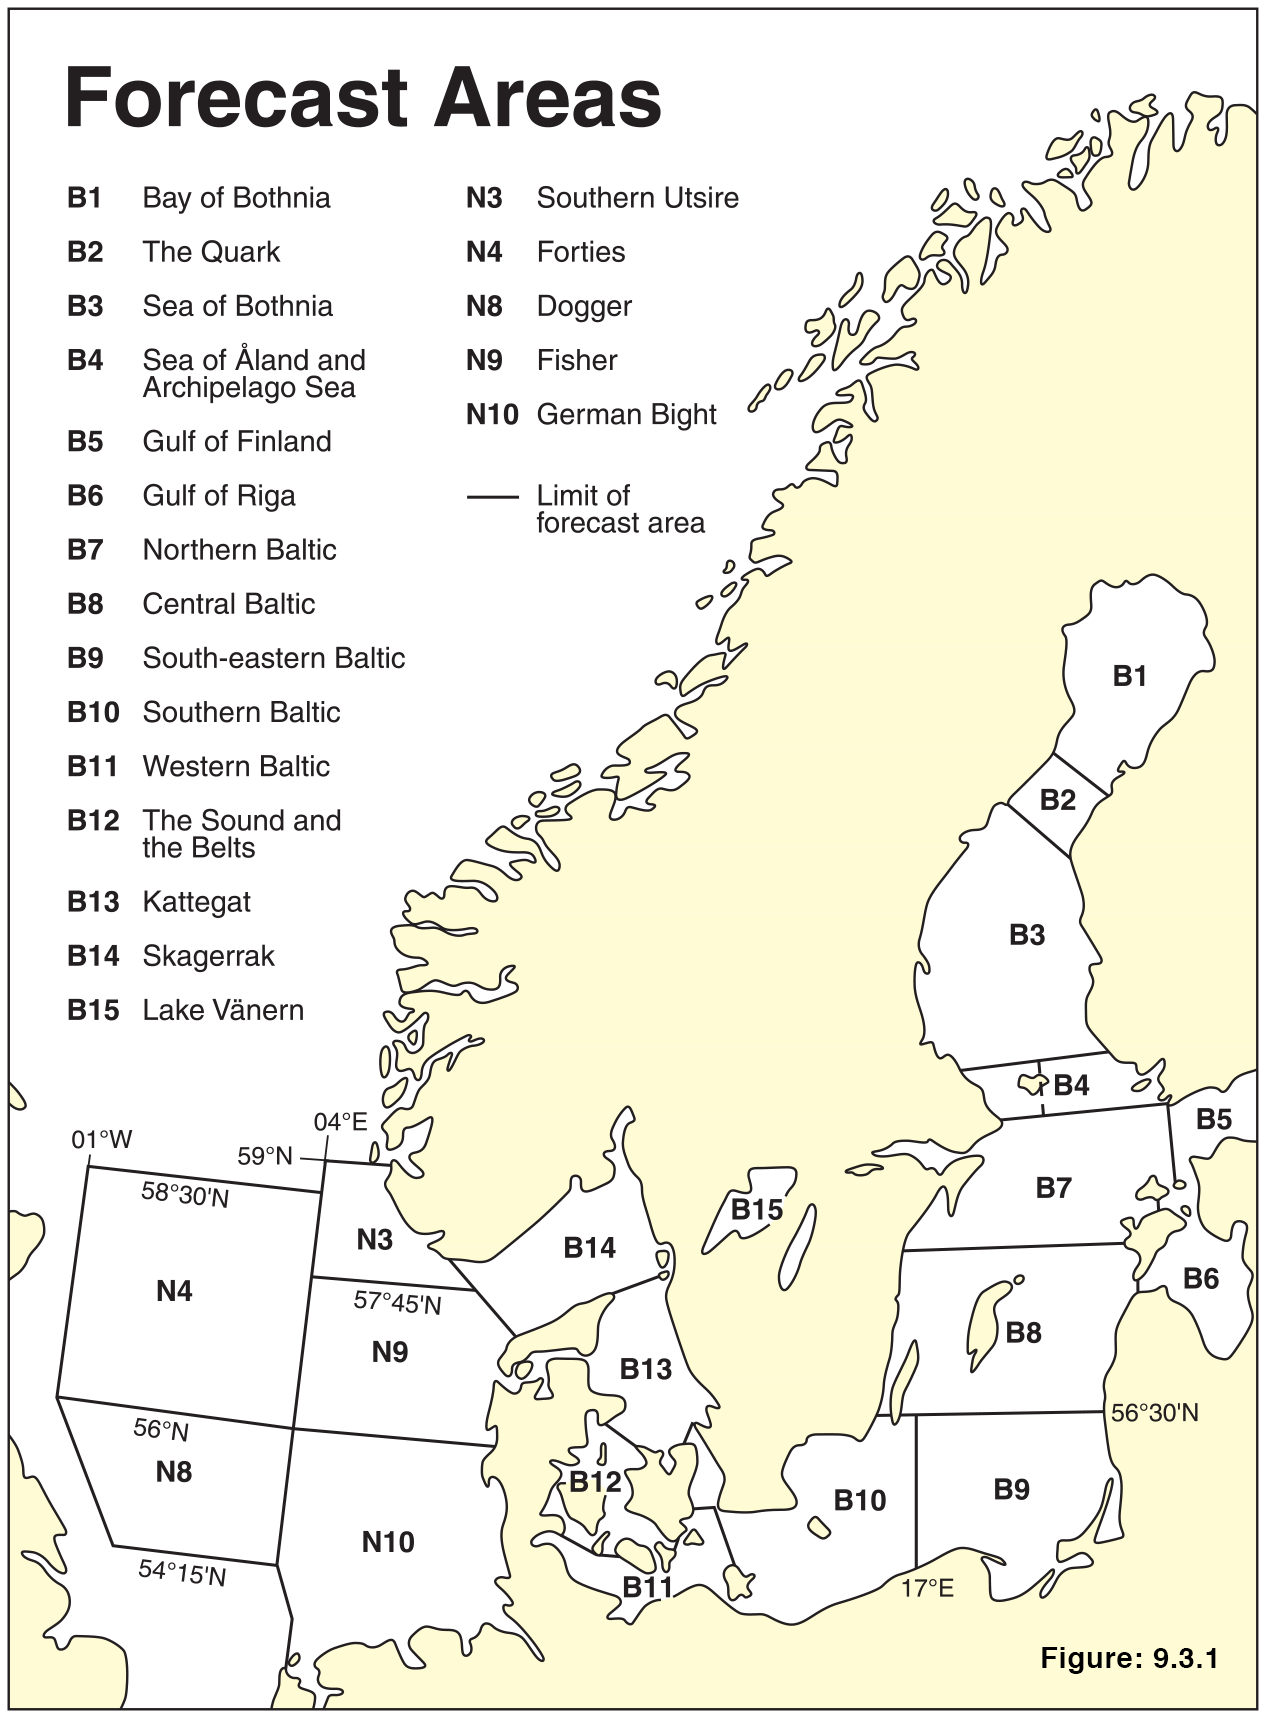 Weather forecast forecasting zones in the Baltic Sea, Gulf of Riga